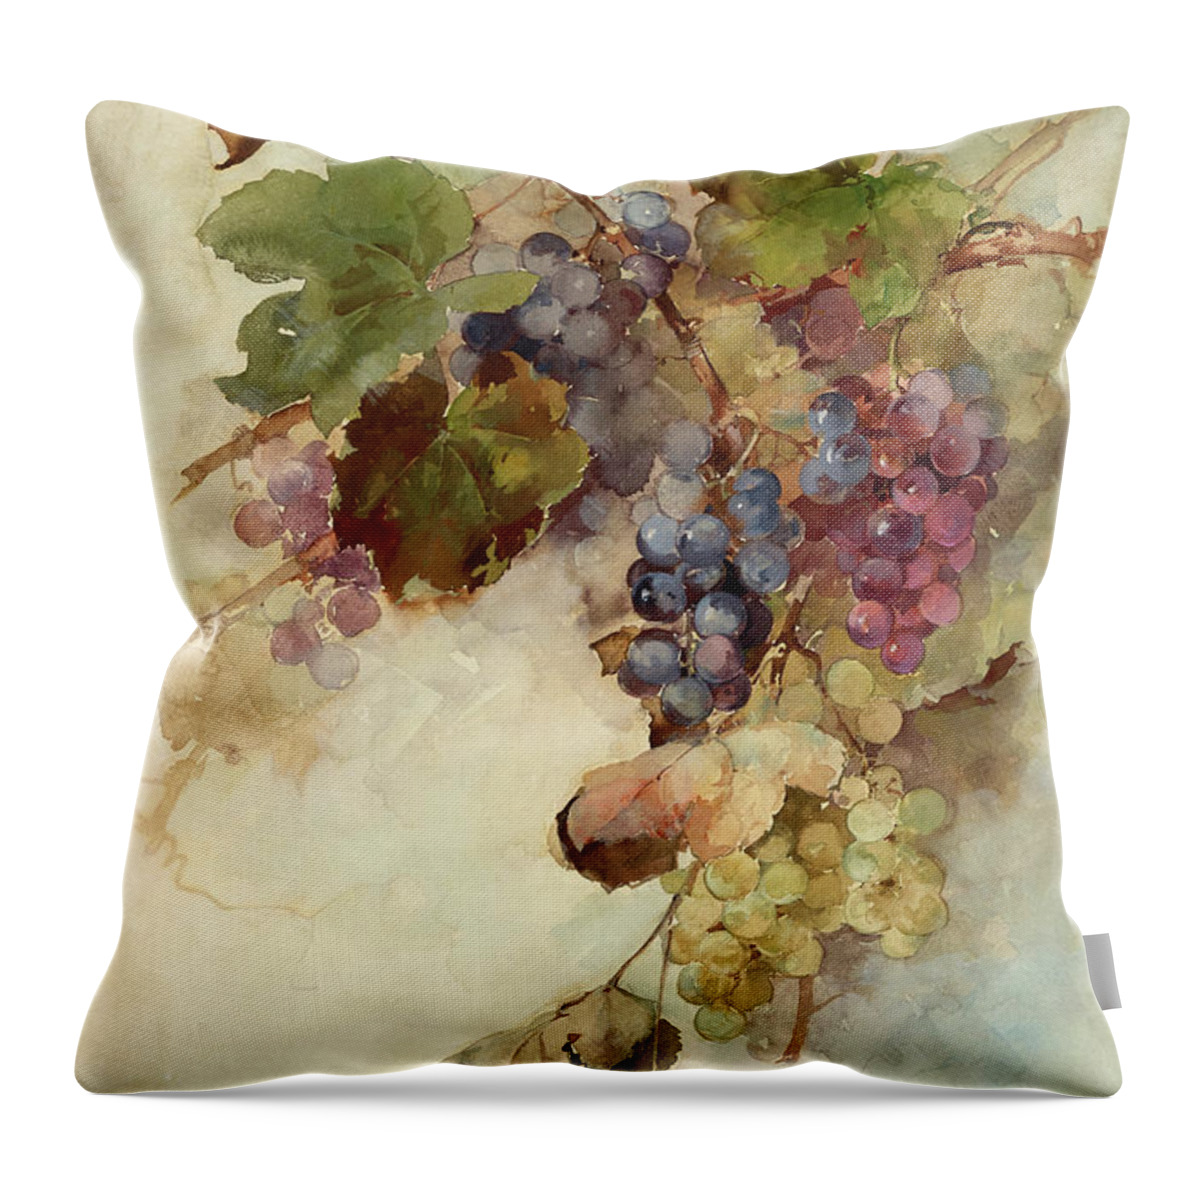 A Vine Of Grapes Throw Pillow featuring the painting A vine of grapes by Franz Arthur Bischoff